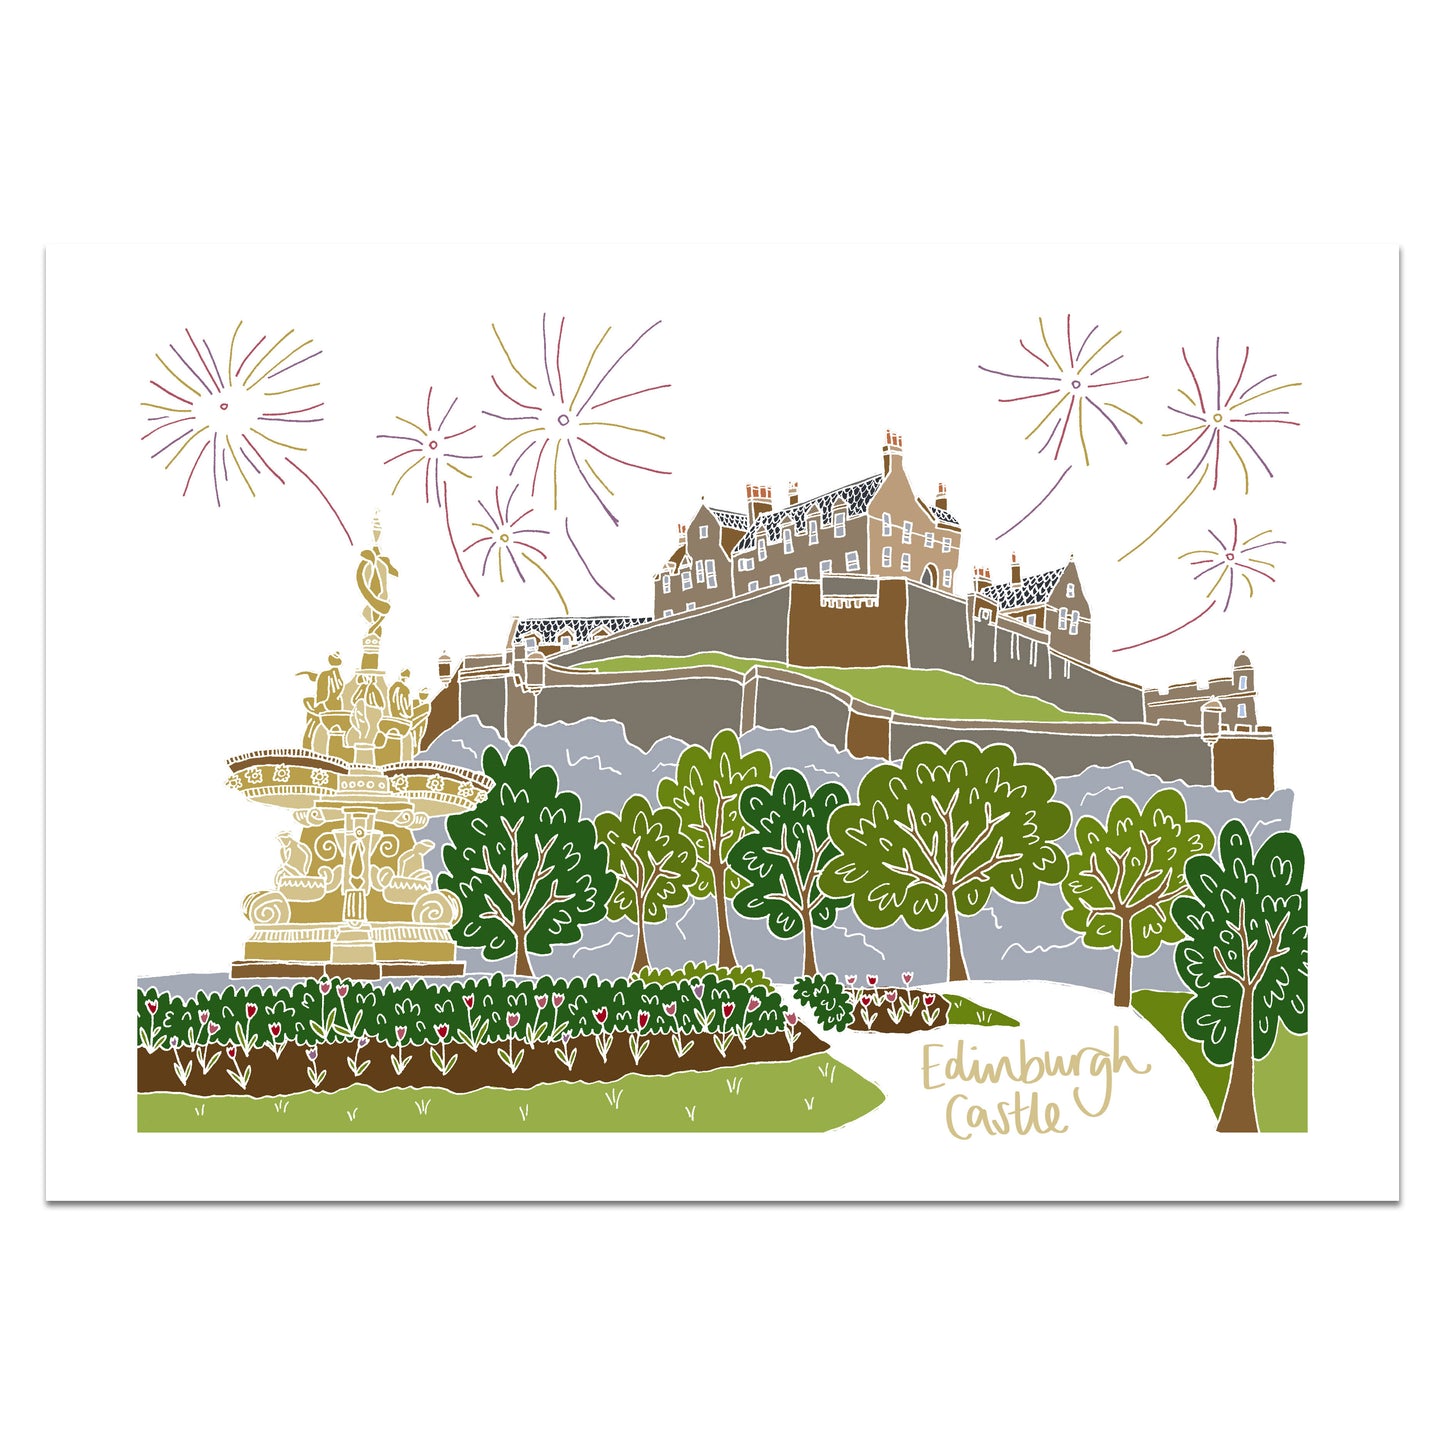 Art Print of Edinburgh Castle. White Background with building on mound with a representation of Princes Street Gardens at base.